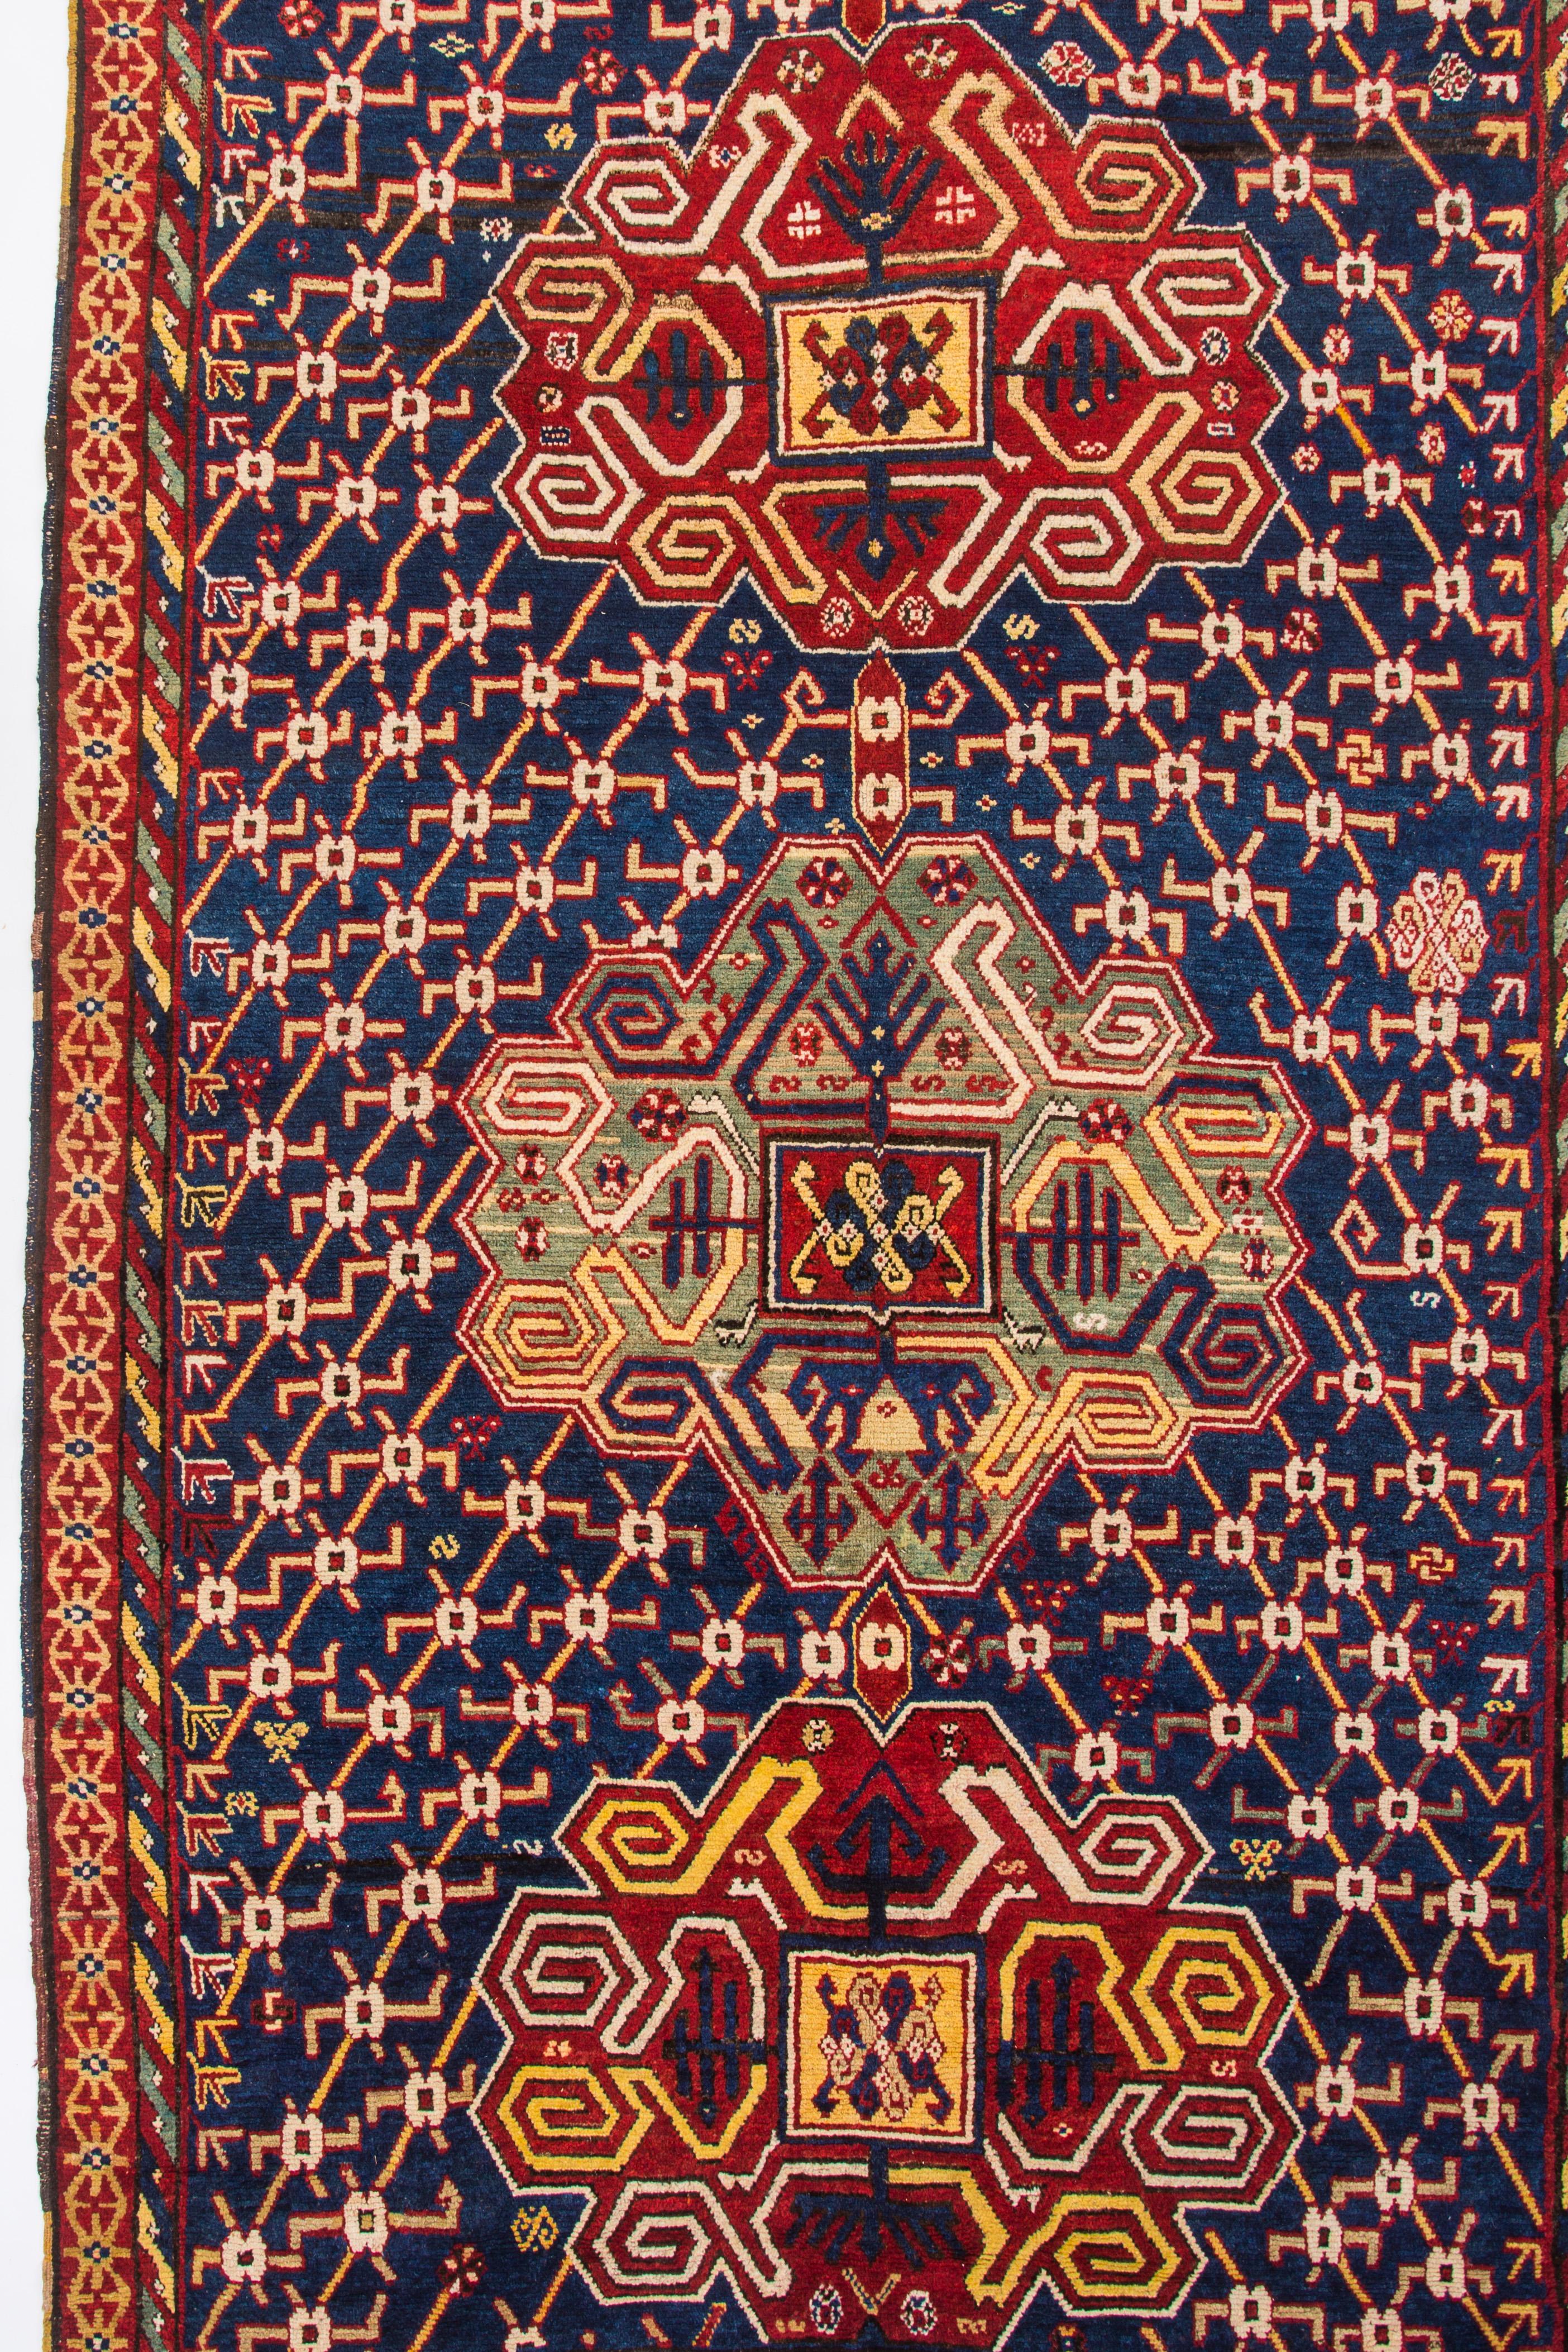 Southern Azerbijan – A TRUE MYSTERY CARPET 2nd half 19th century, or earlier
10 x 6

From a Colorado Collector’s estate

This carpet has proven to be a challenging enigma and lead us on an unusual journey of discovery and speculation.  Originally